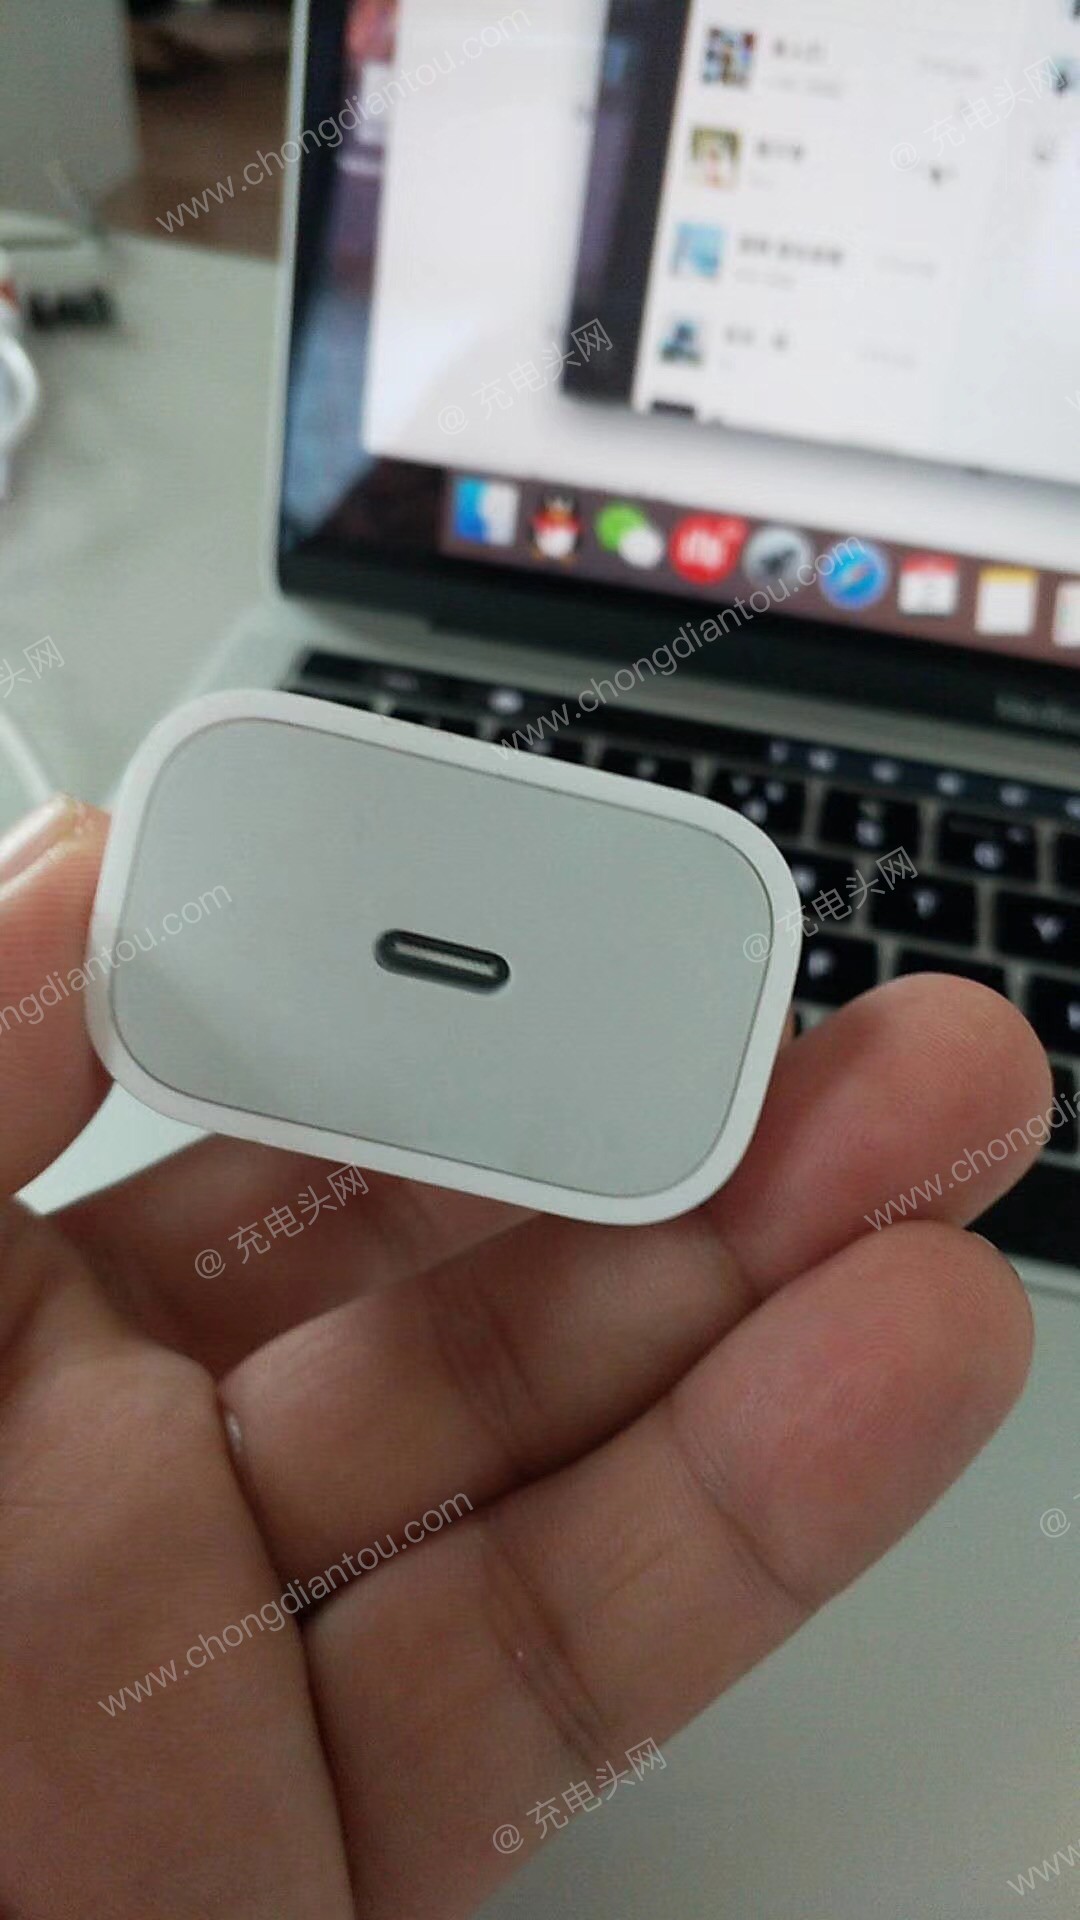 New 2018 iphone 18w type c fast charger leaked 521803 2